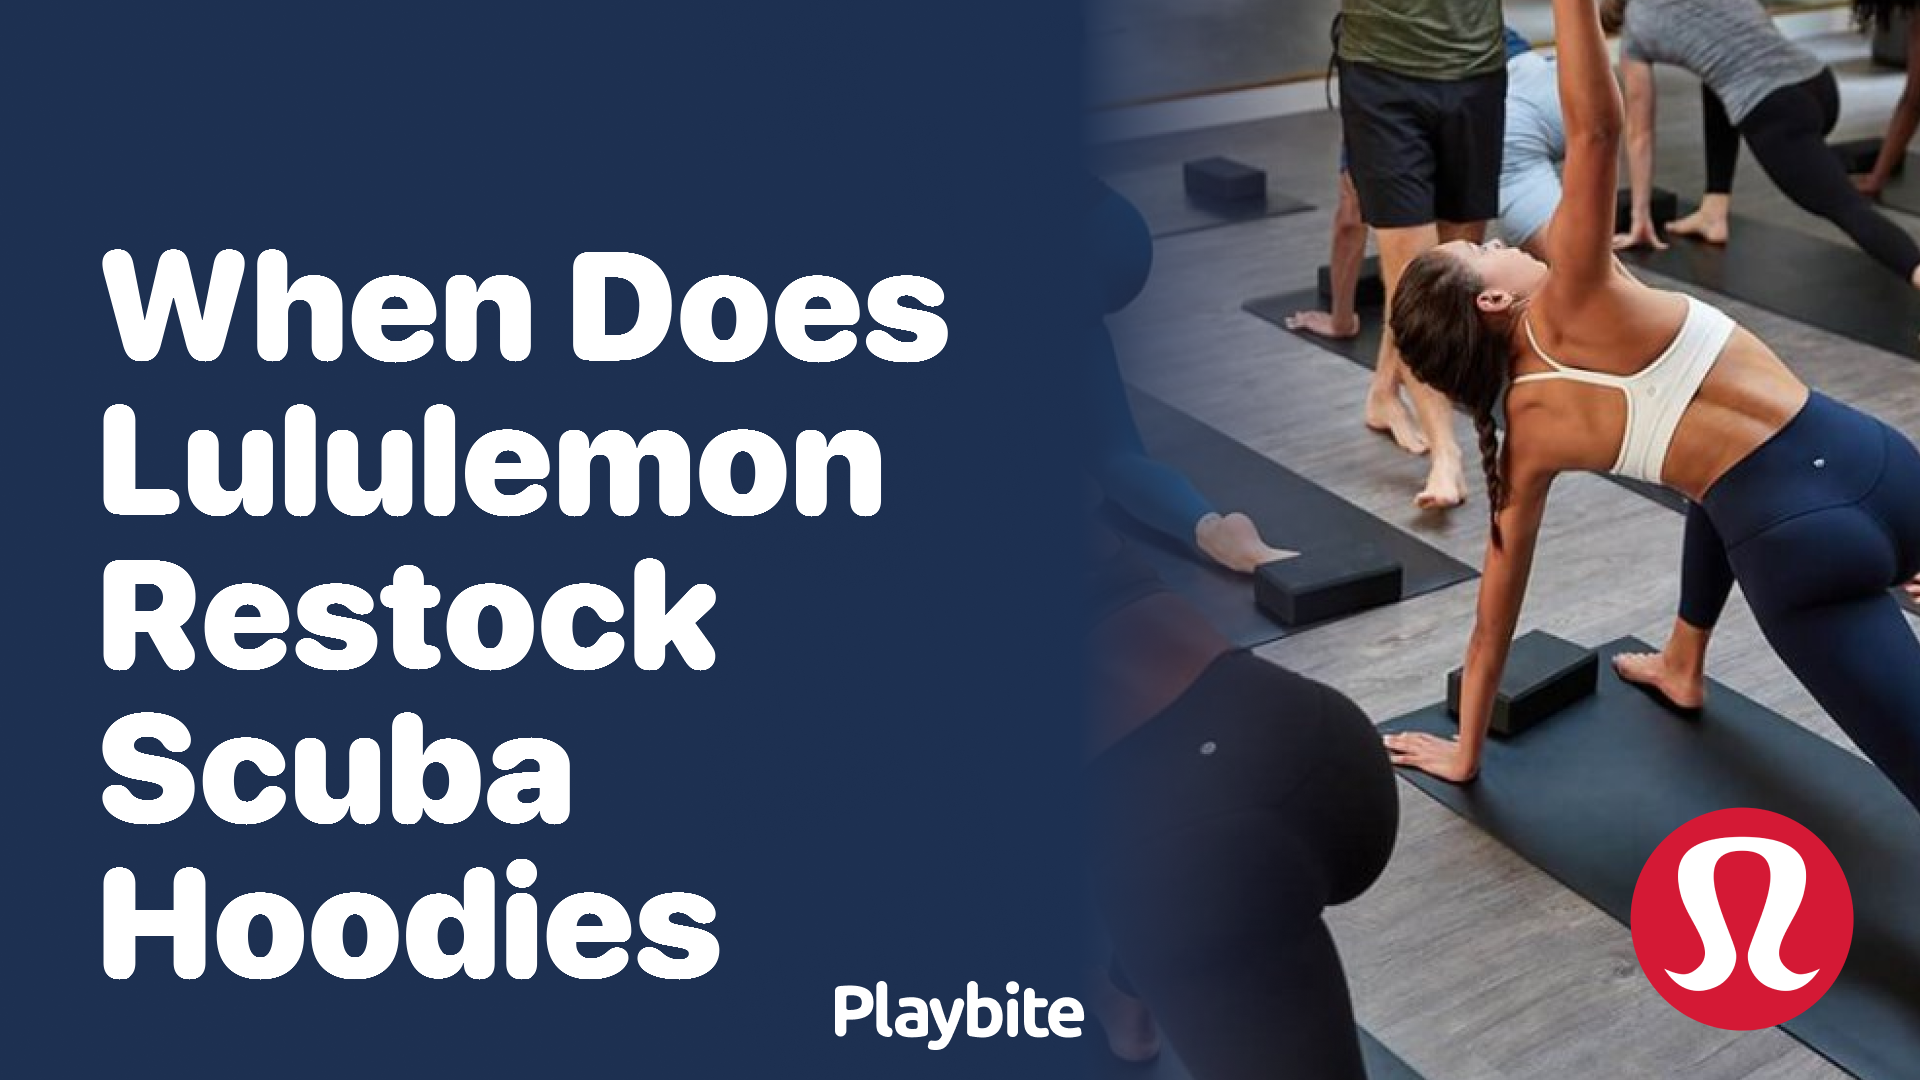 When Does Lululemon Restock Scuba Hoodies? Find Out Here! - Playbite